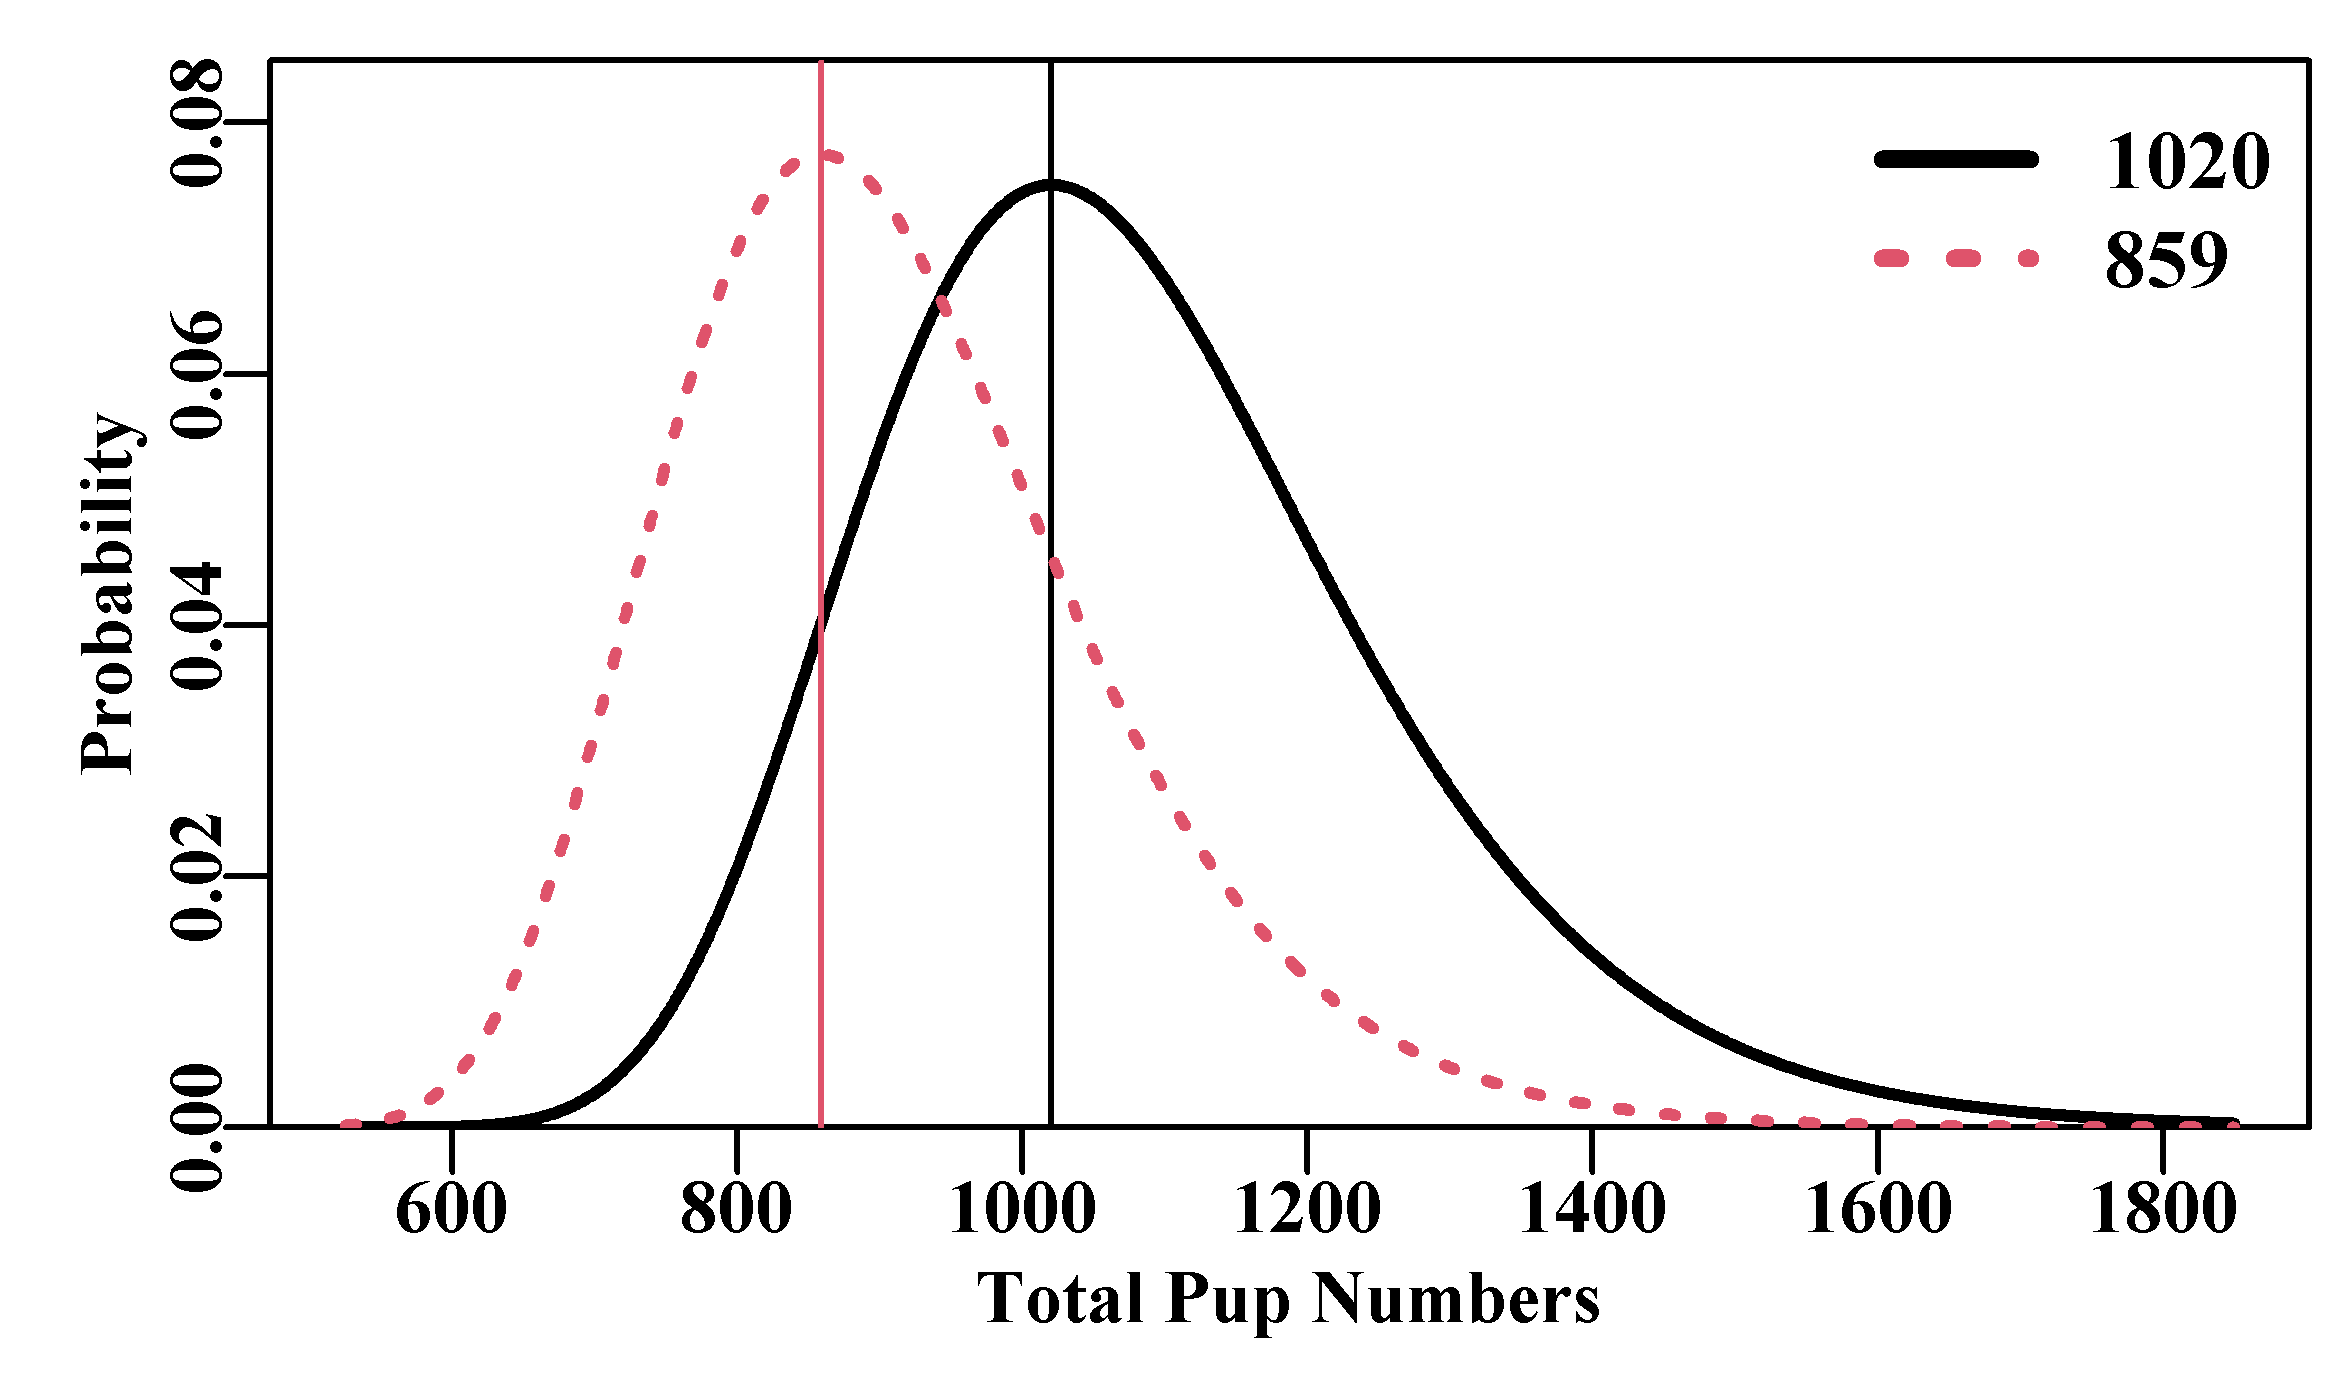 The population size versus likelihood distribution for two estimates of fur seal pup population size obtained using tagging experiments where 151 pups were tagged (Greaves, 1992). The right-hand black line is from a single count of 32 tags from 222 pups observed, while the left-hand dashed curve is from a count of 31 tags from 181 observed. The modes (optimum population estimates) are indicated by the vertical lines and in the legend.